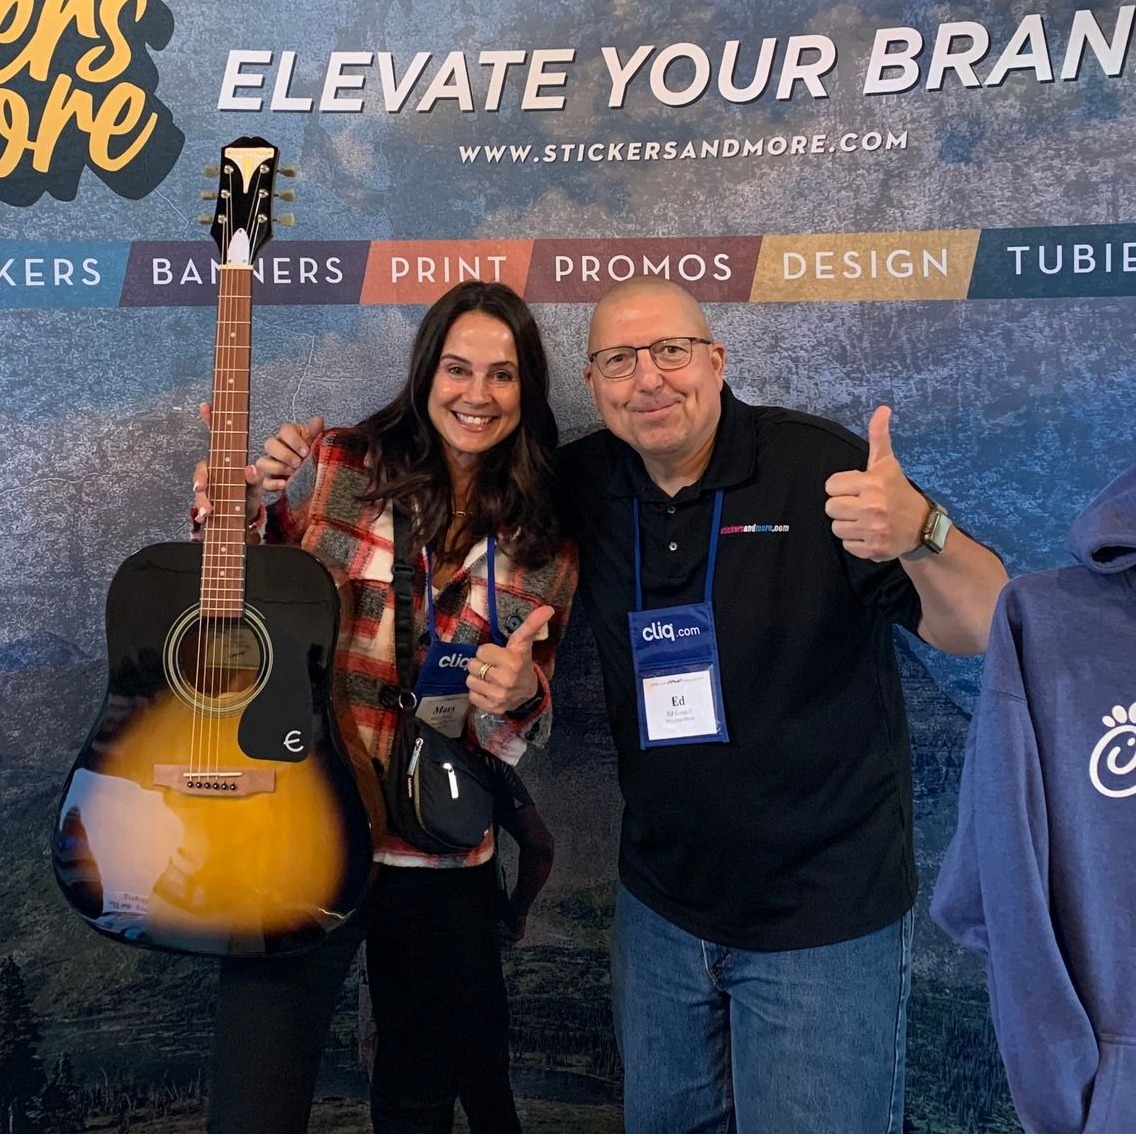 Congrats to Mary from Camp Agawak for Girls in Minocqua, WI on winning the guitar at the American Camp Association Wisconsin Fall Gathering in Dodgeville. Let us help you elevate your brand. Check out our website to se how we can help. 
https://stickersandmore.com/camp/
 @acacamps #ACA #camps #camplife #funlife